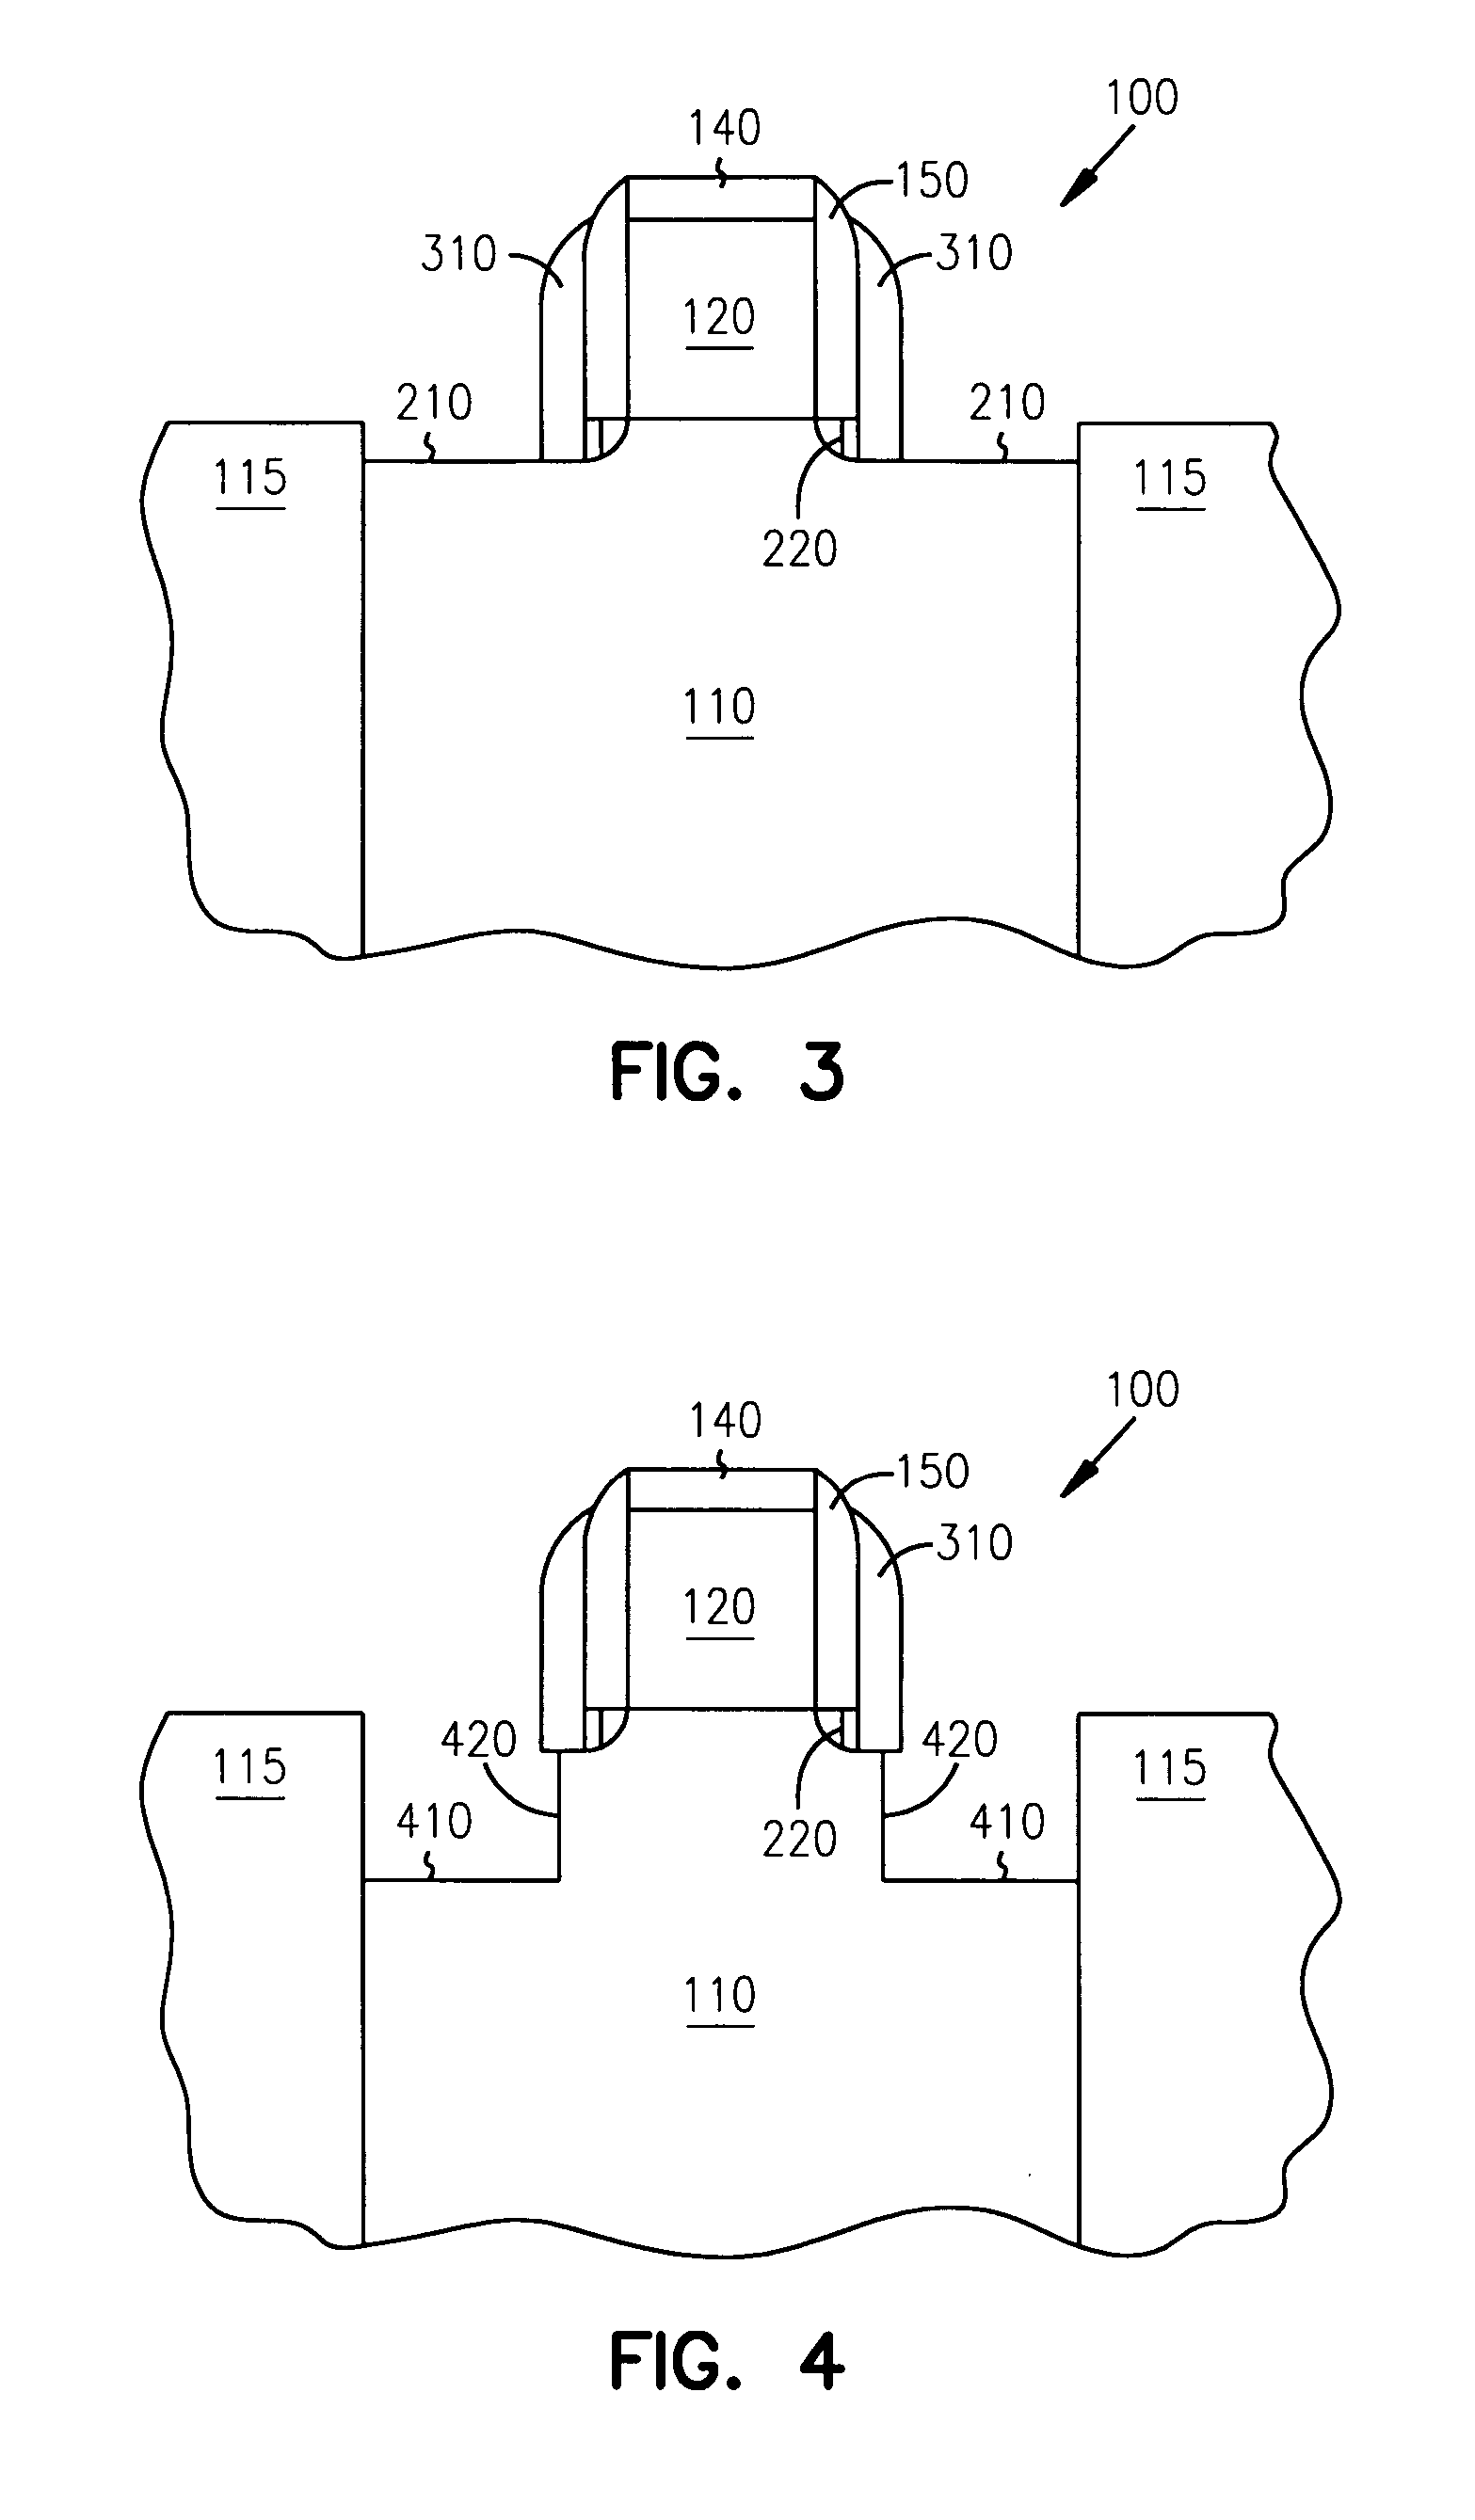 Methods of fabricating a dielectric plug in MOSFETs to suppress short-channel effects